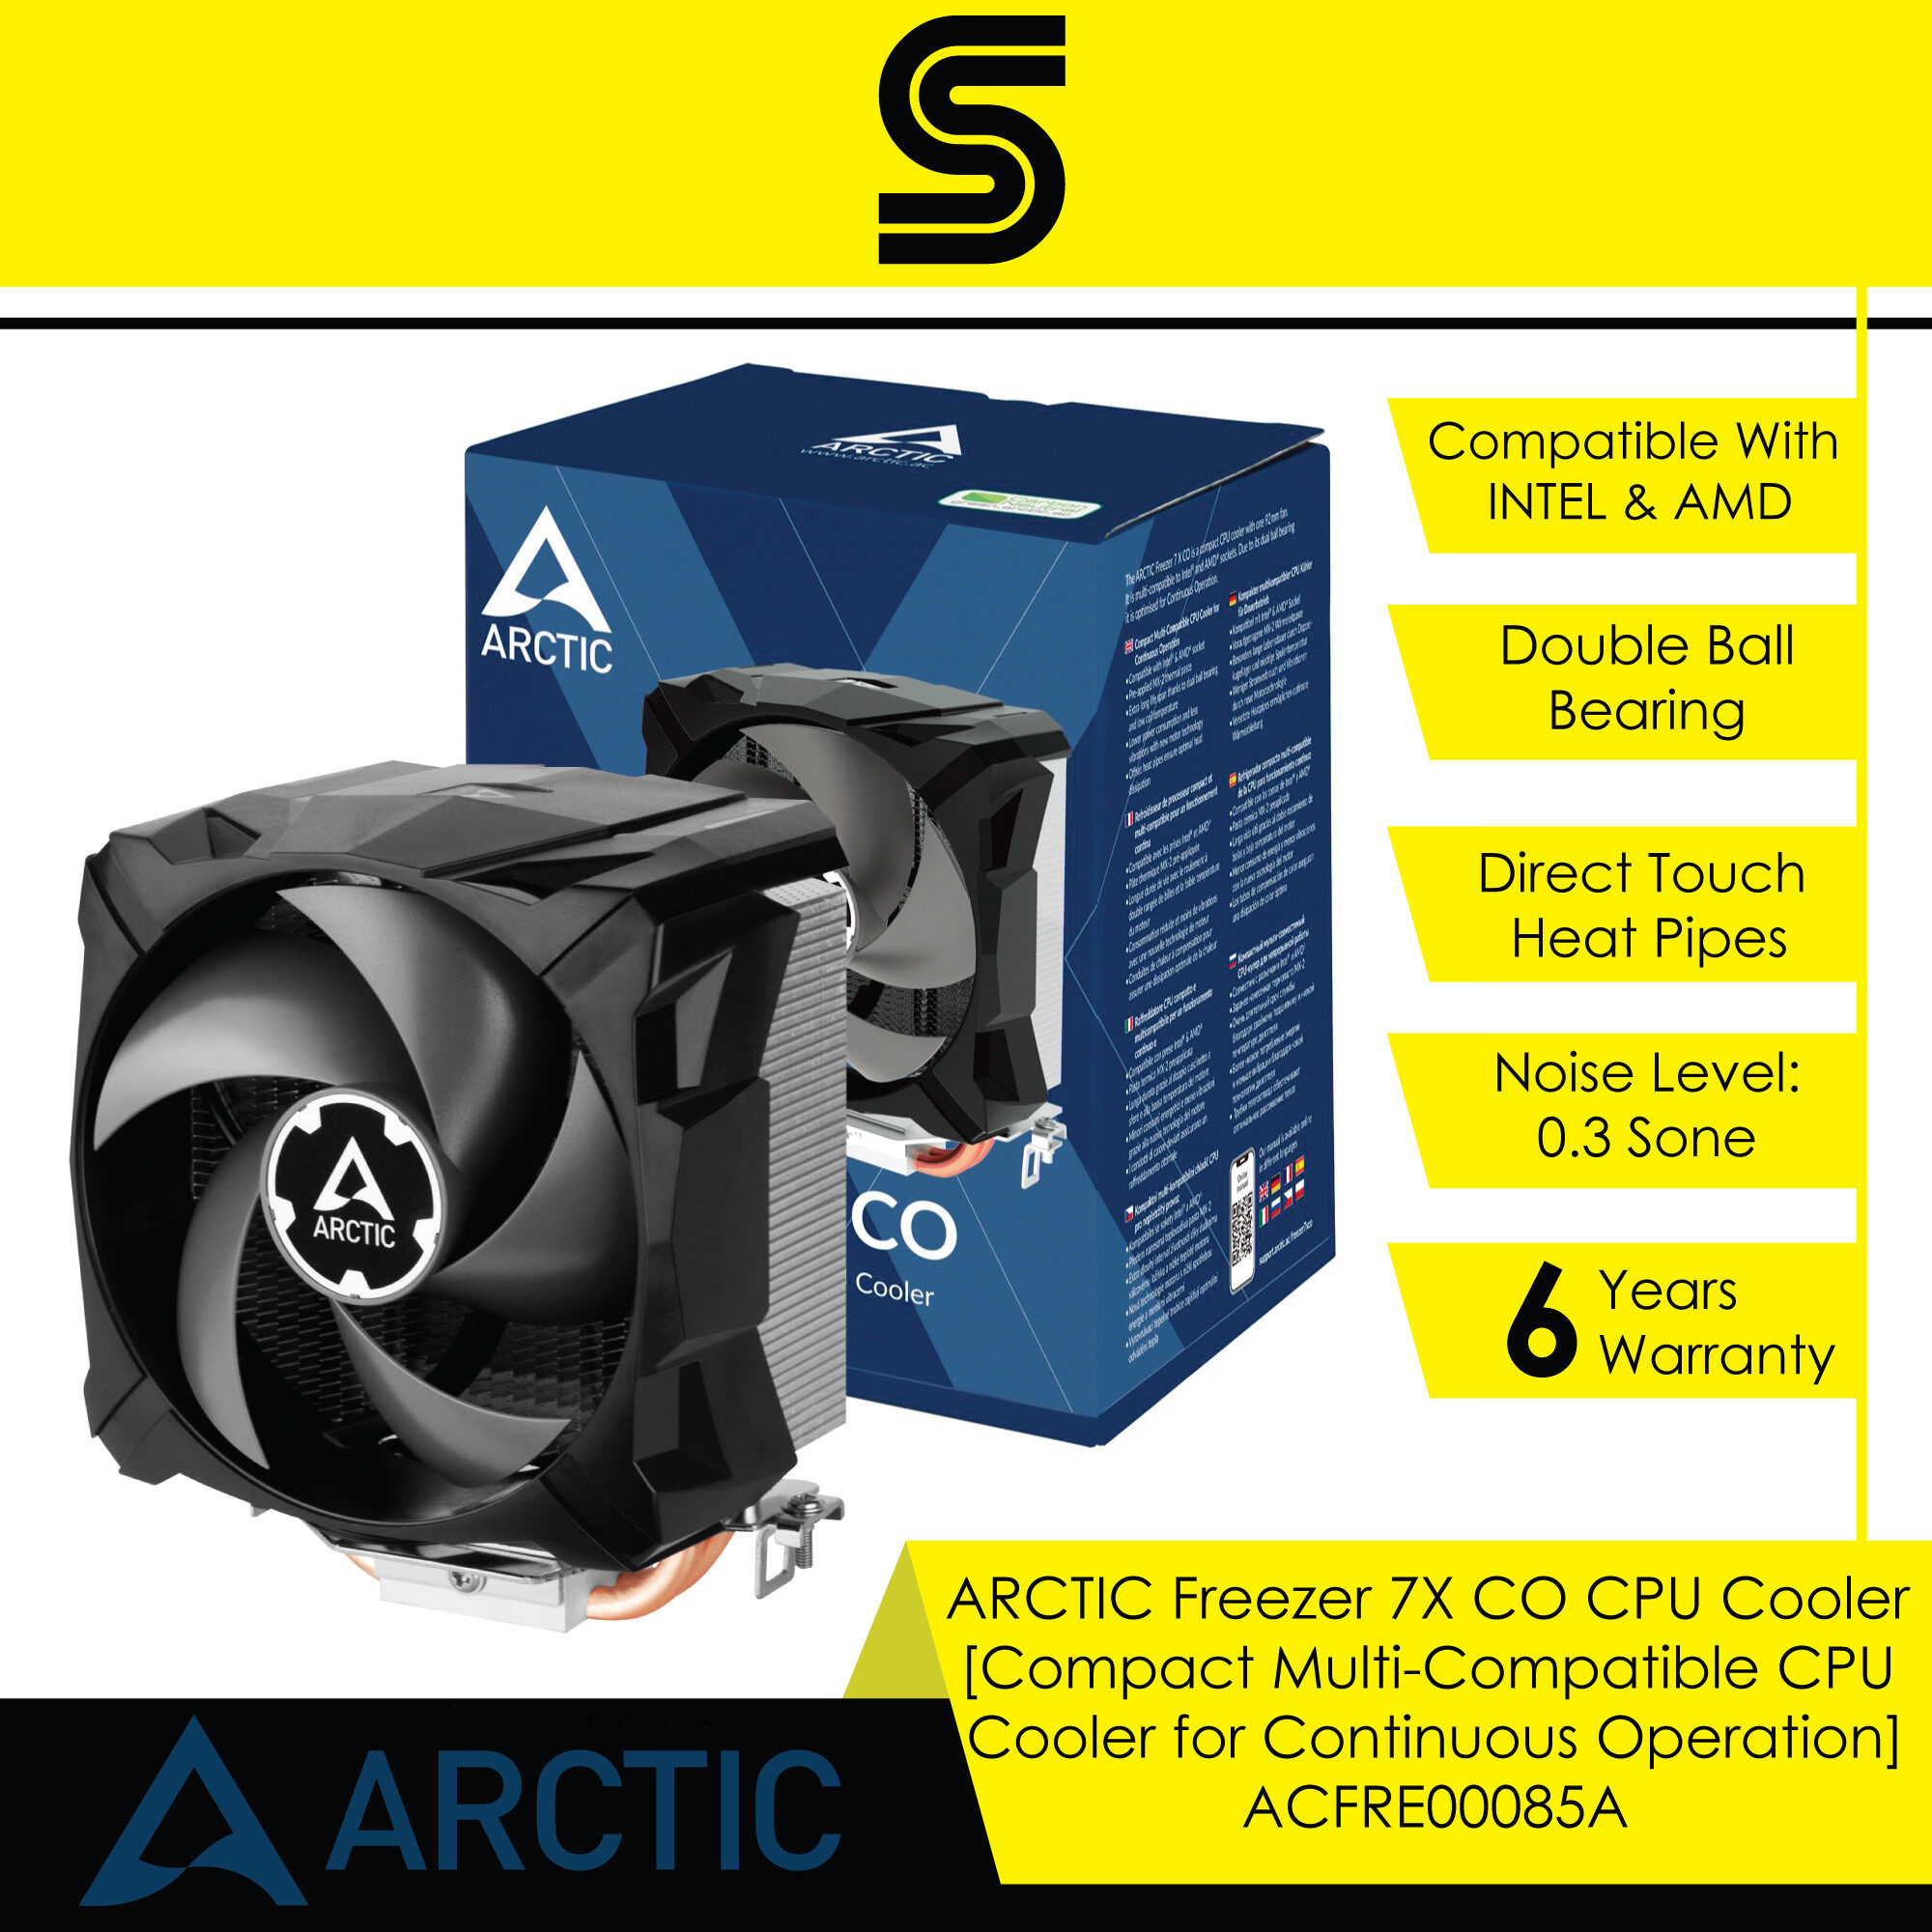 ARCTIC Freezer 7X CO CPU Cooler [Compact Multi-Compatible CPU Cooler for Continuous Operation]